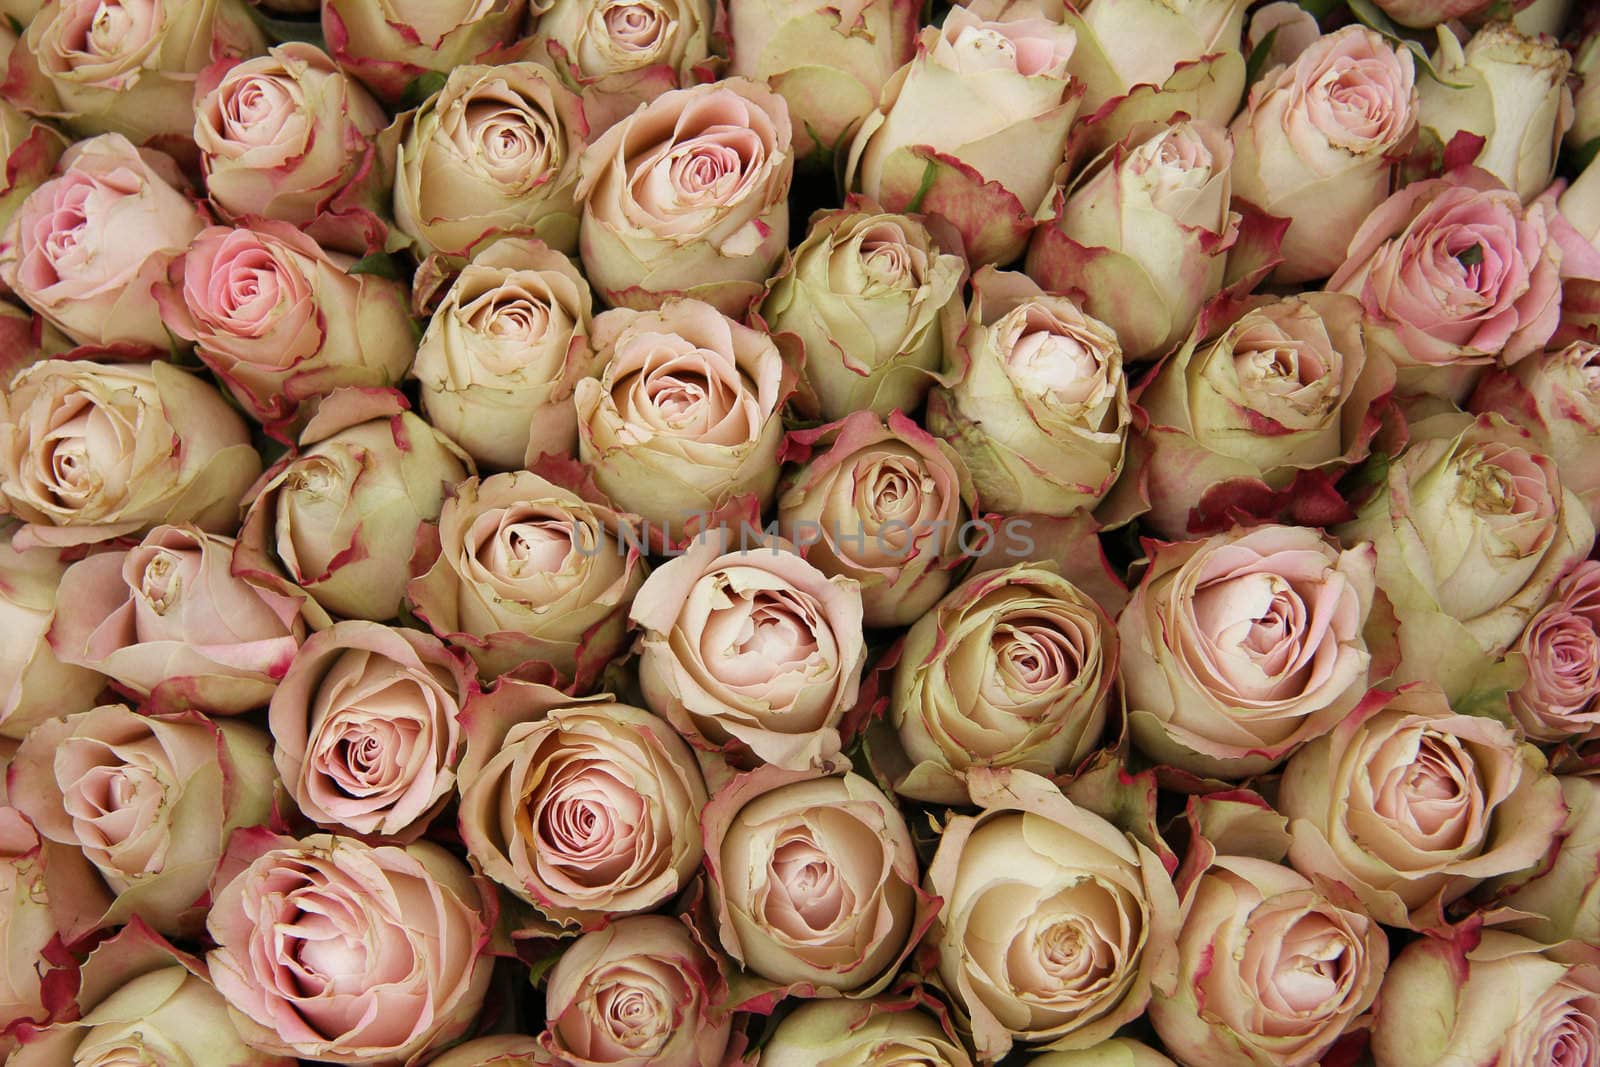 Pale pink rose buds by studioportosabbia